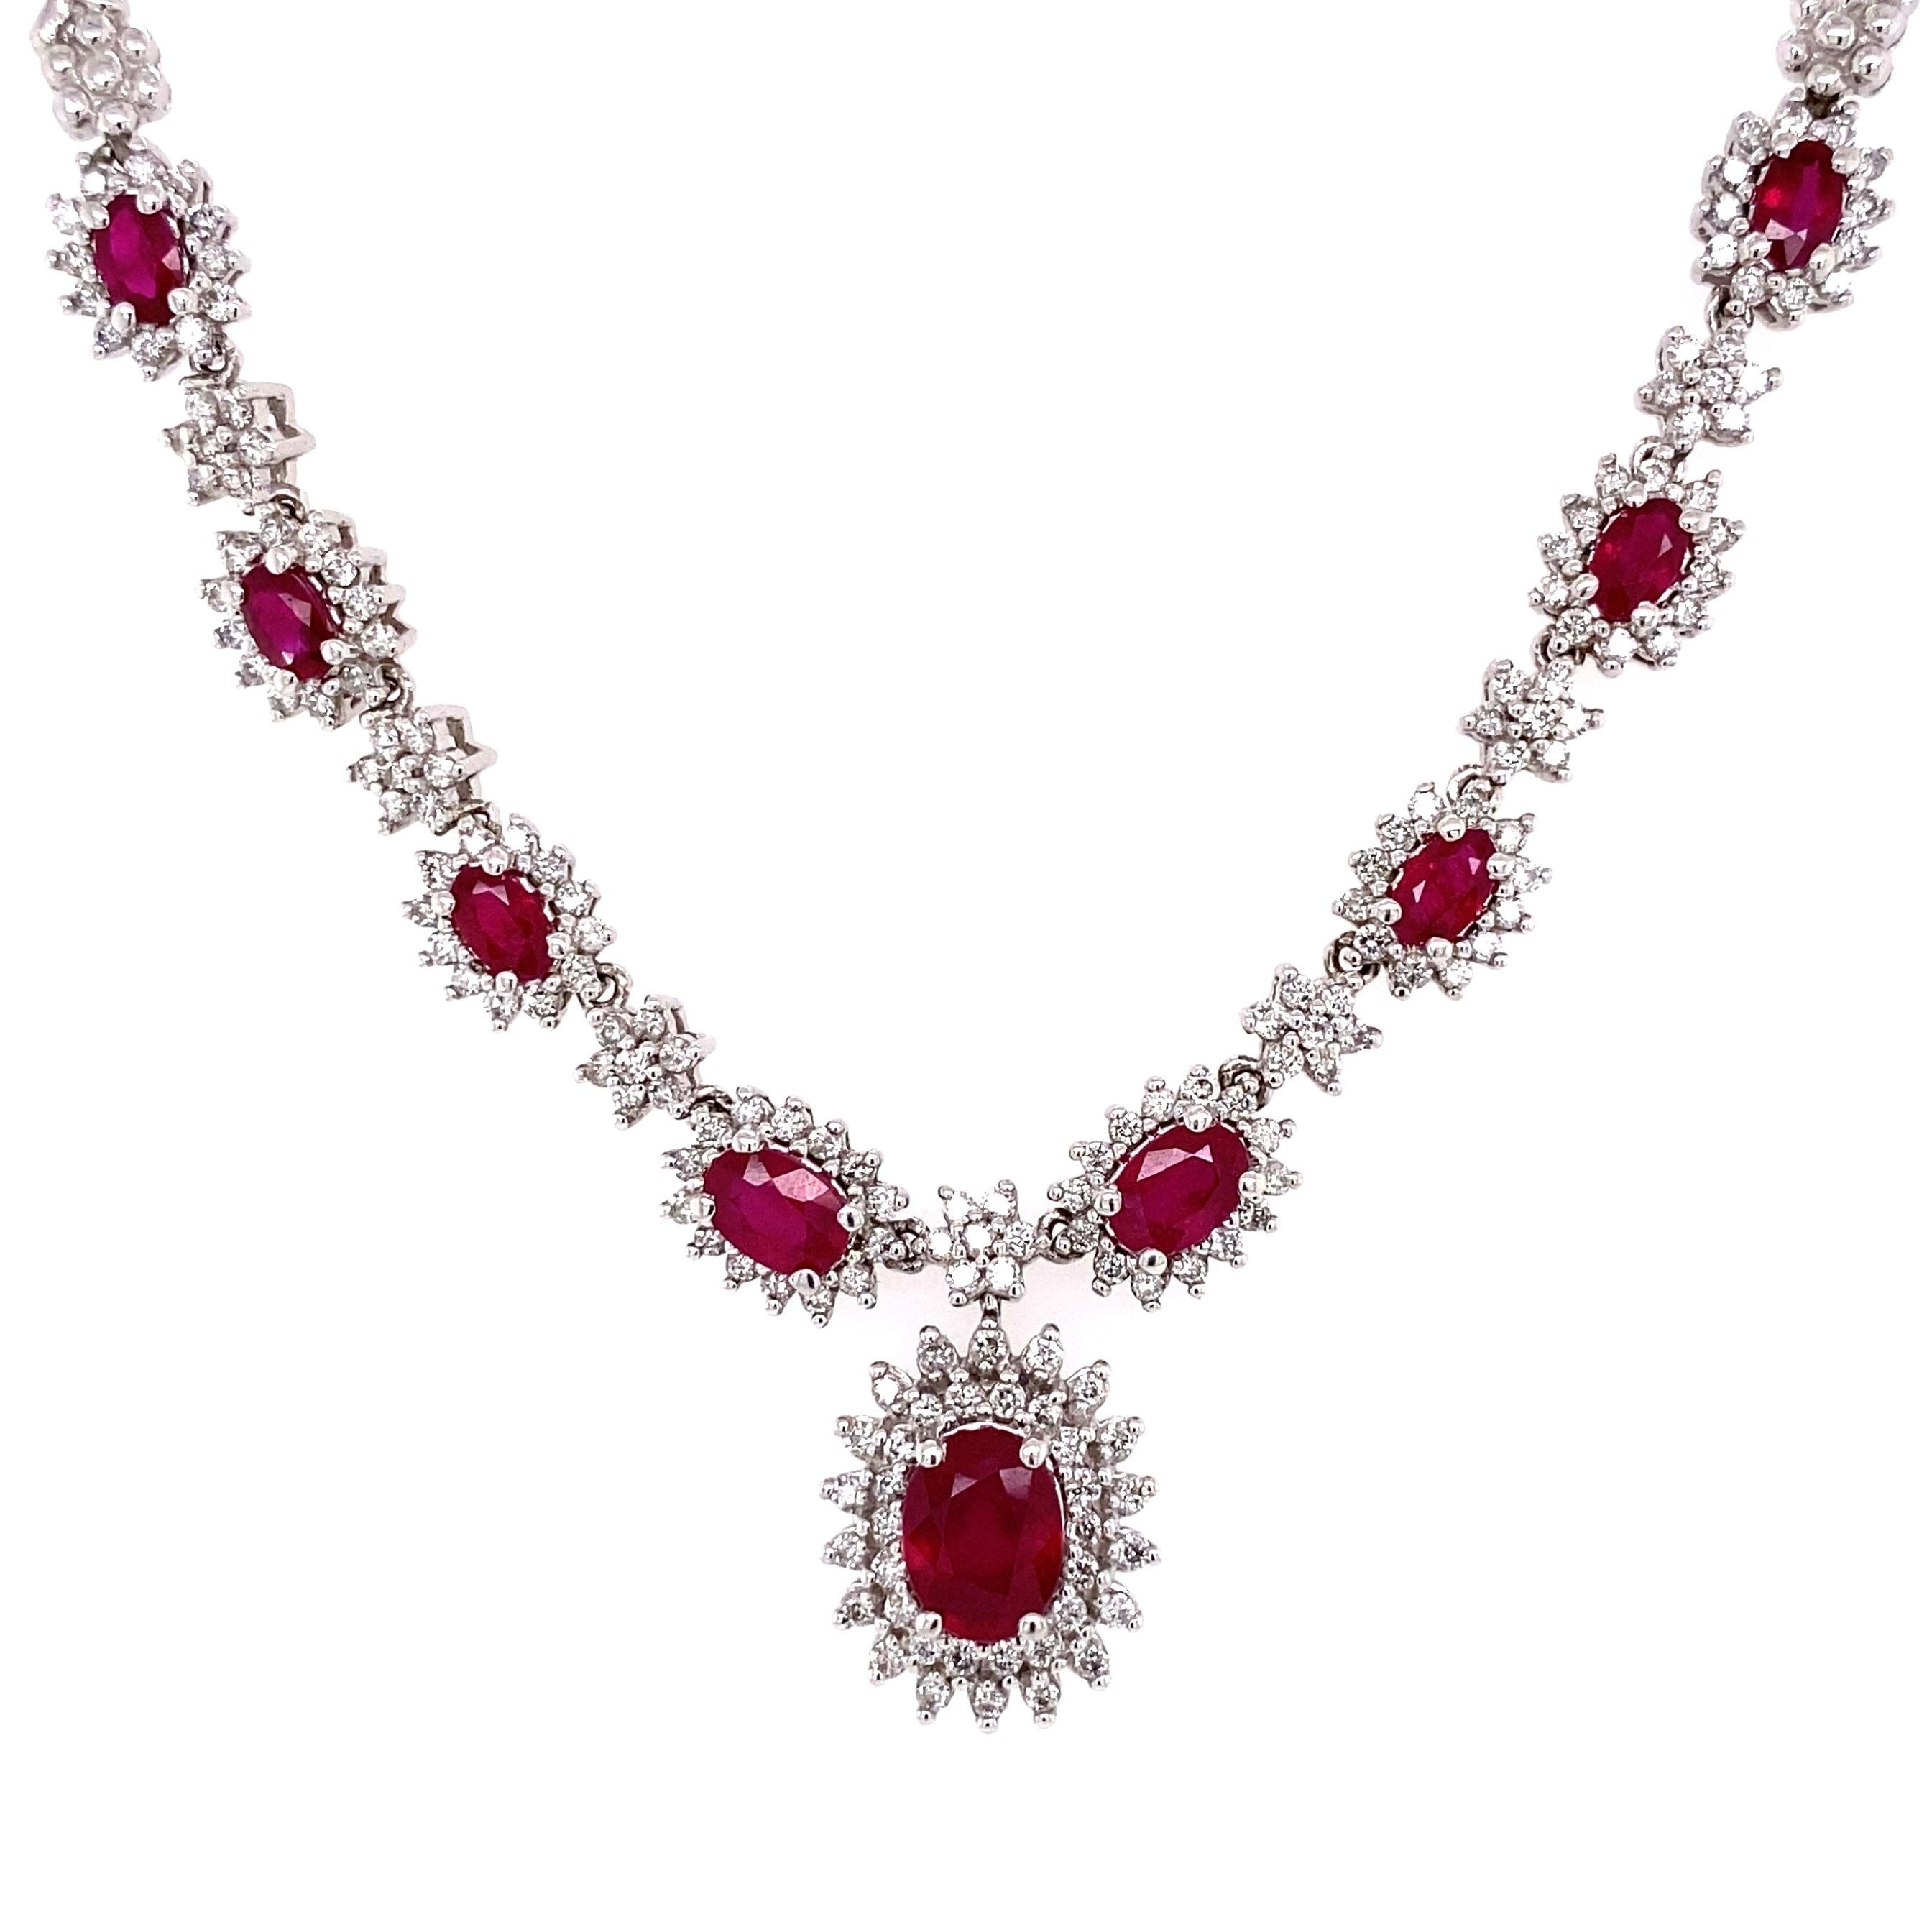 Simply Fabulous! Beautiful Finely detailed Red Ruby and Diamond Necklace. Hand set with Rubies, weighing approx. 2.90tcw and Diamonds, approx. 1.12tcw. Hand crafted in 14K White Gold. Approx. length of necklace: 16